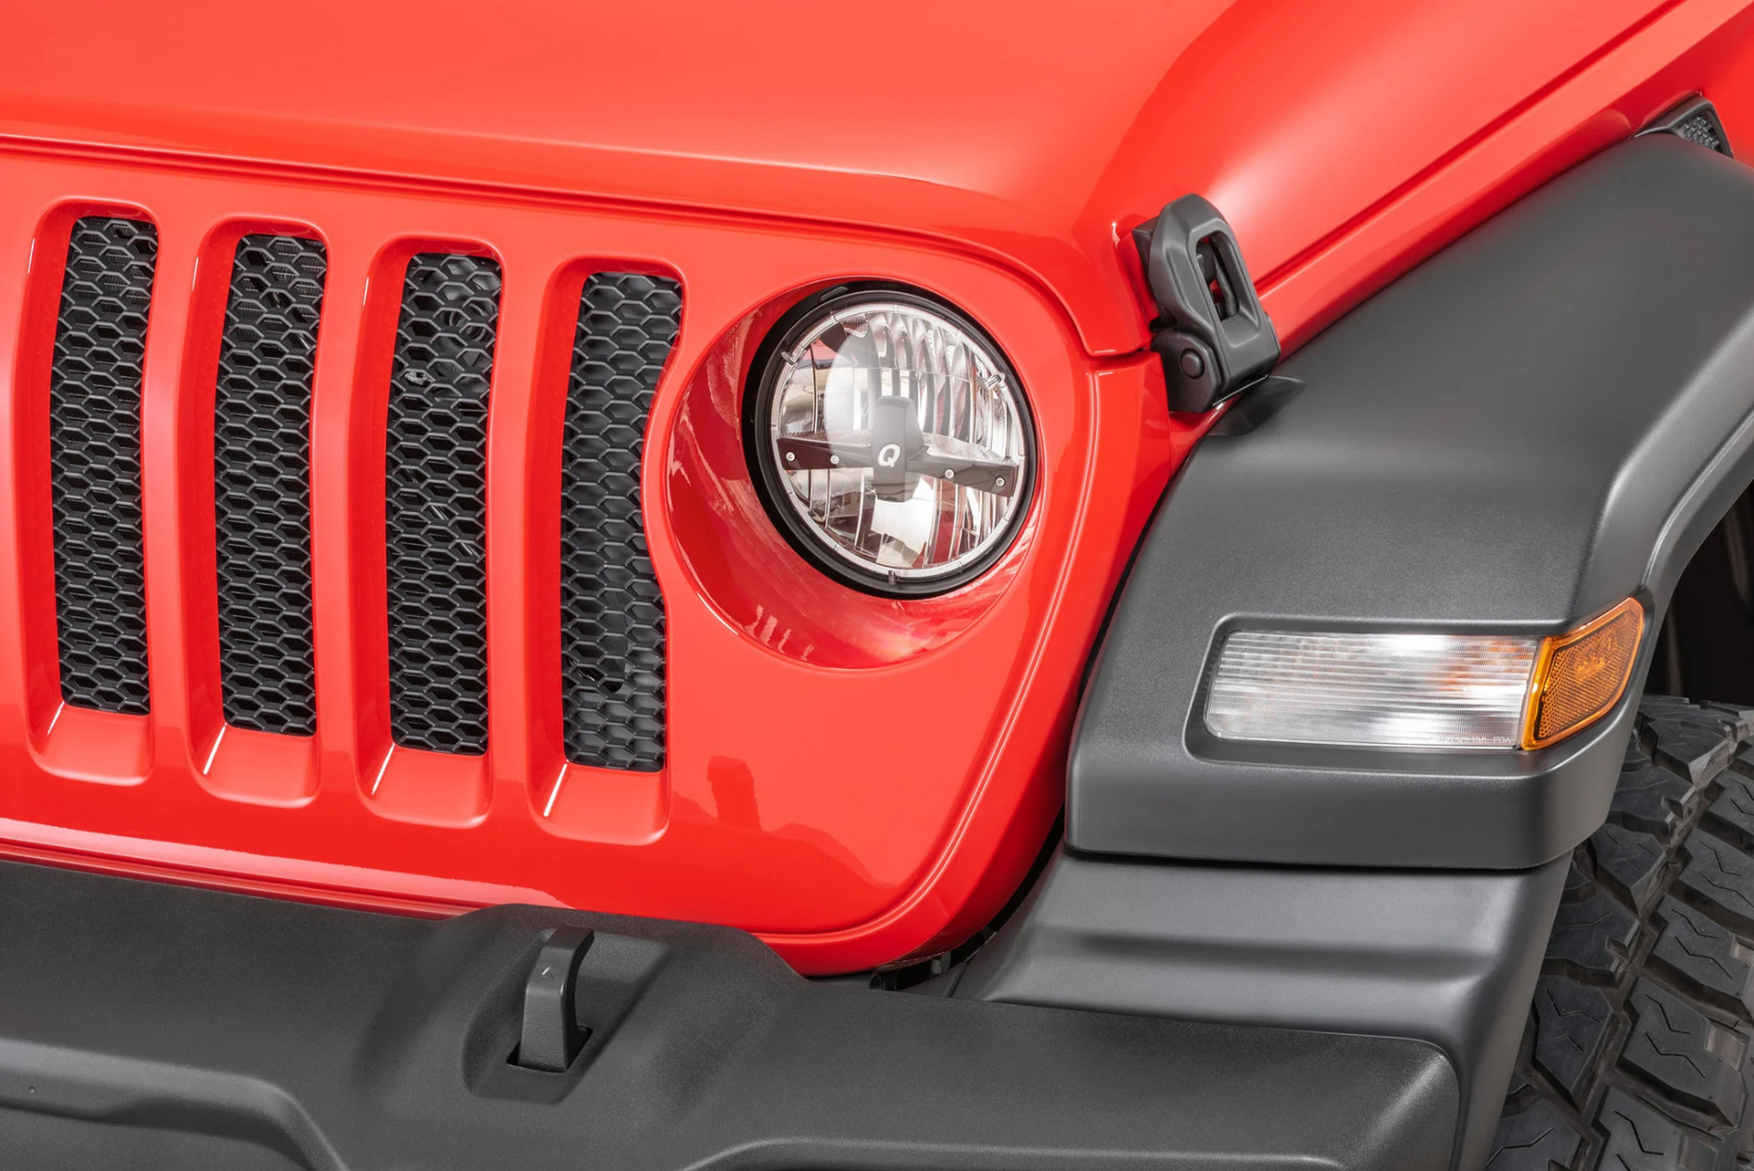 How To Properly Adjust Your New Jeep Headlights